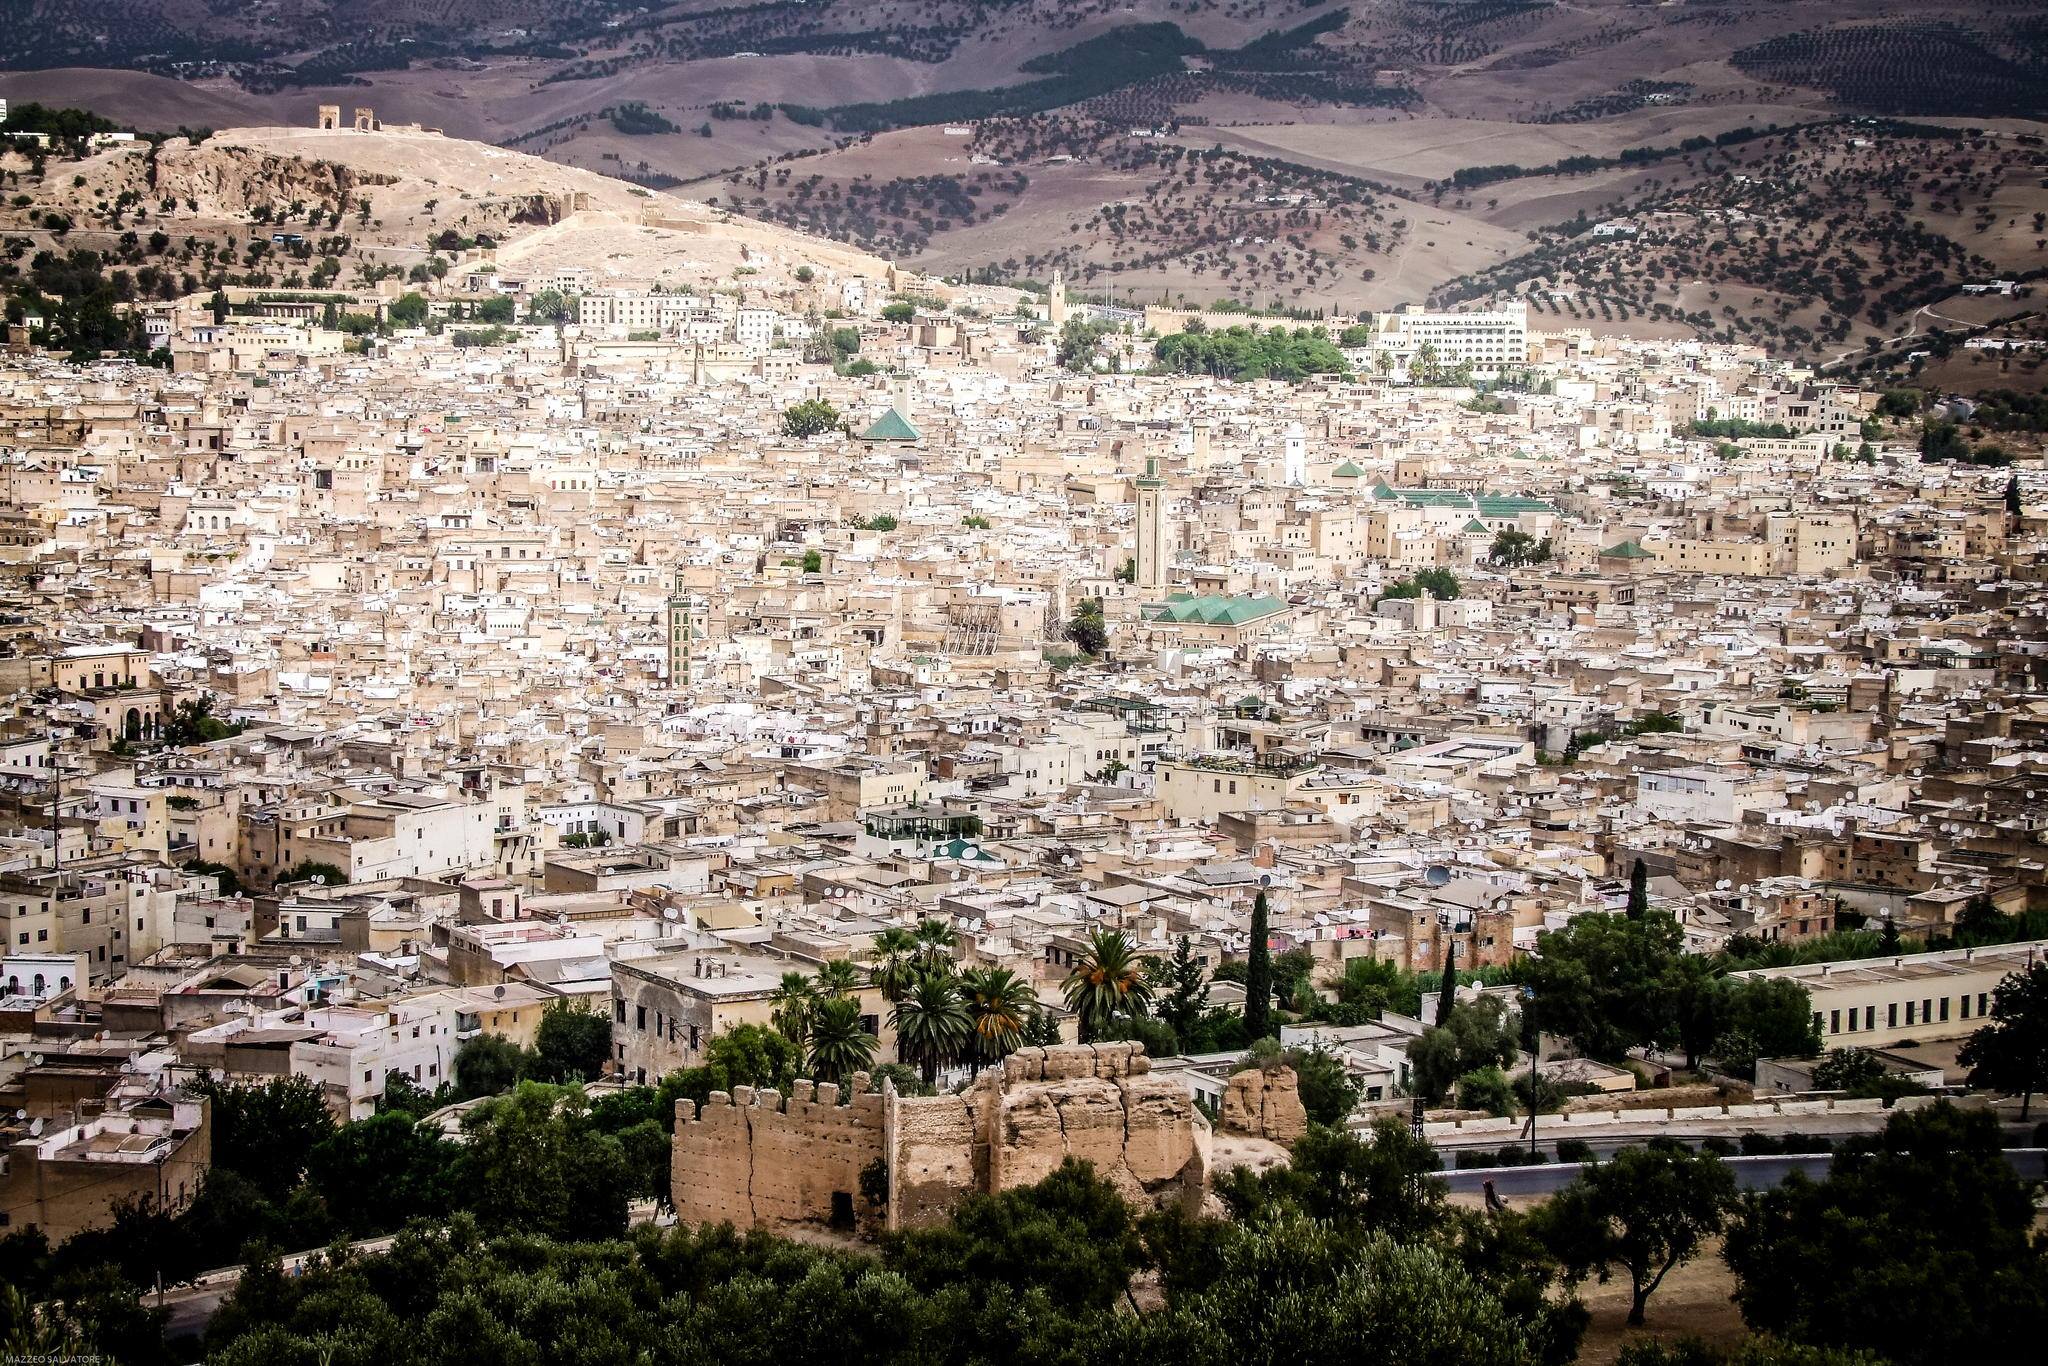 Panoramic view of Fes from the merinid tombs.